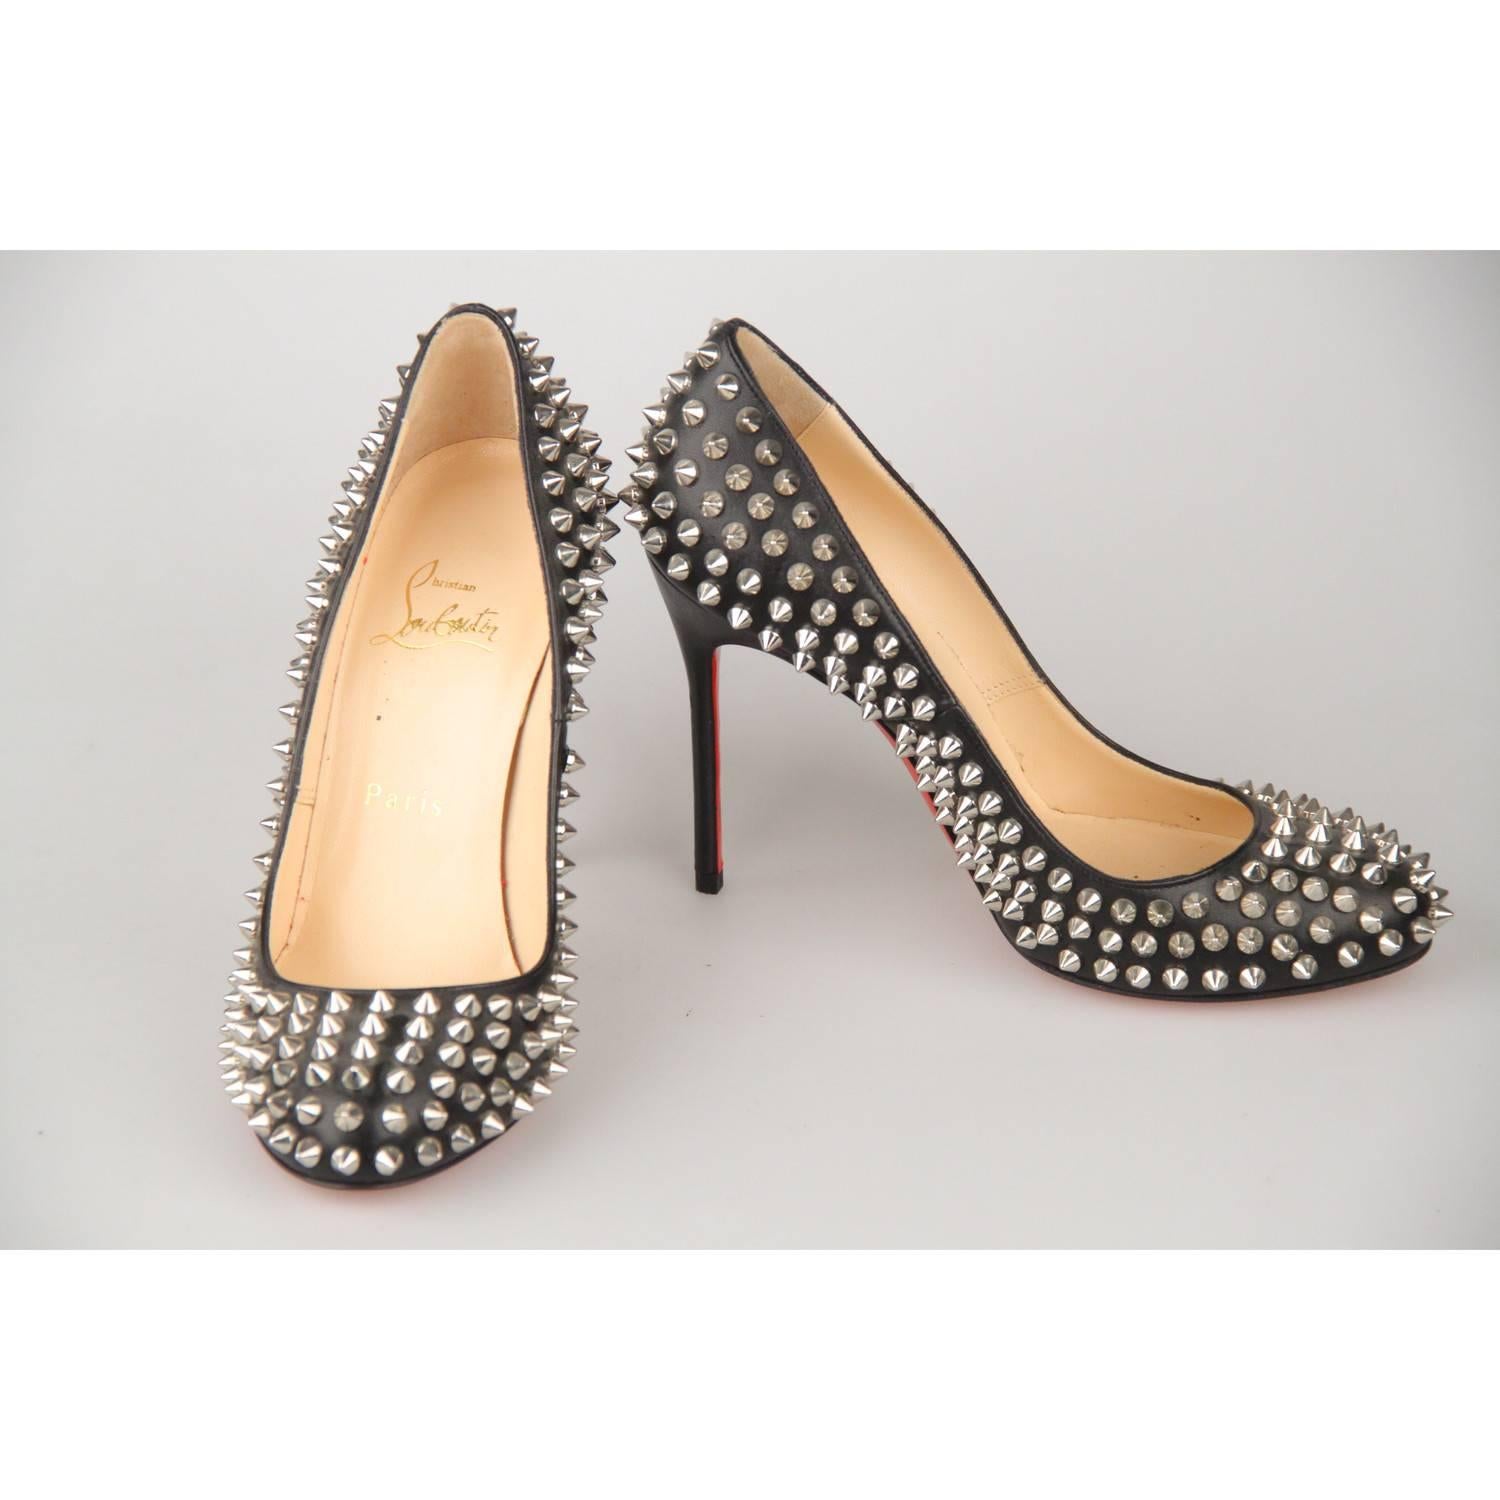 Beige CHRISTIAN LOUBOUTIN Black Leather Fifi Spikes 100 Pumps Shoes 36.5